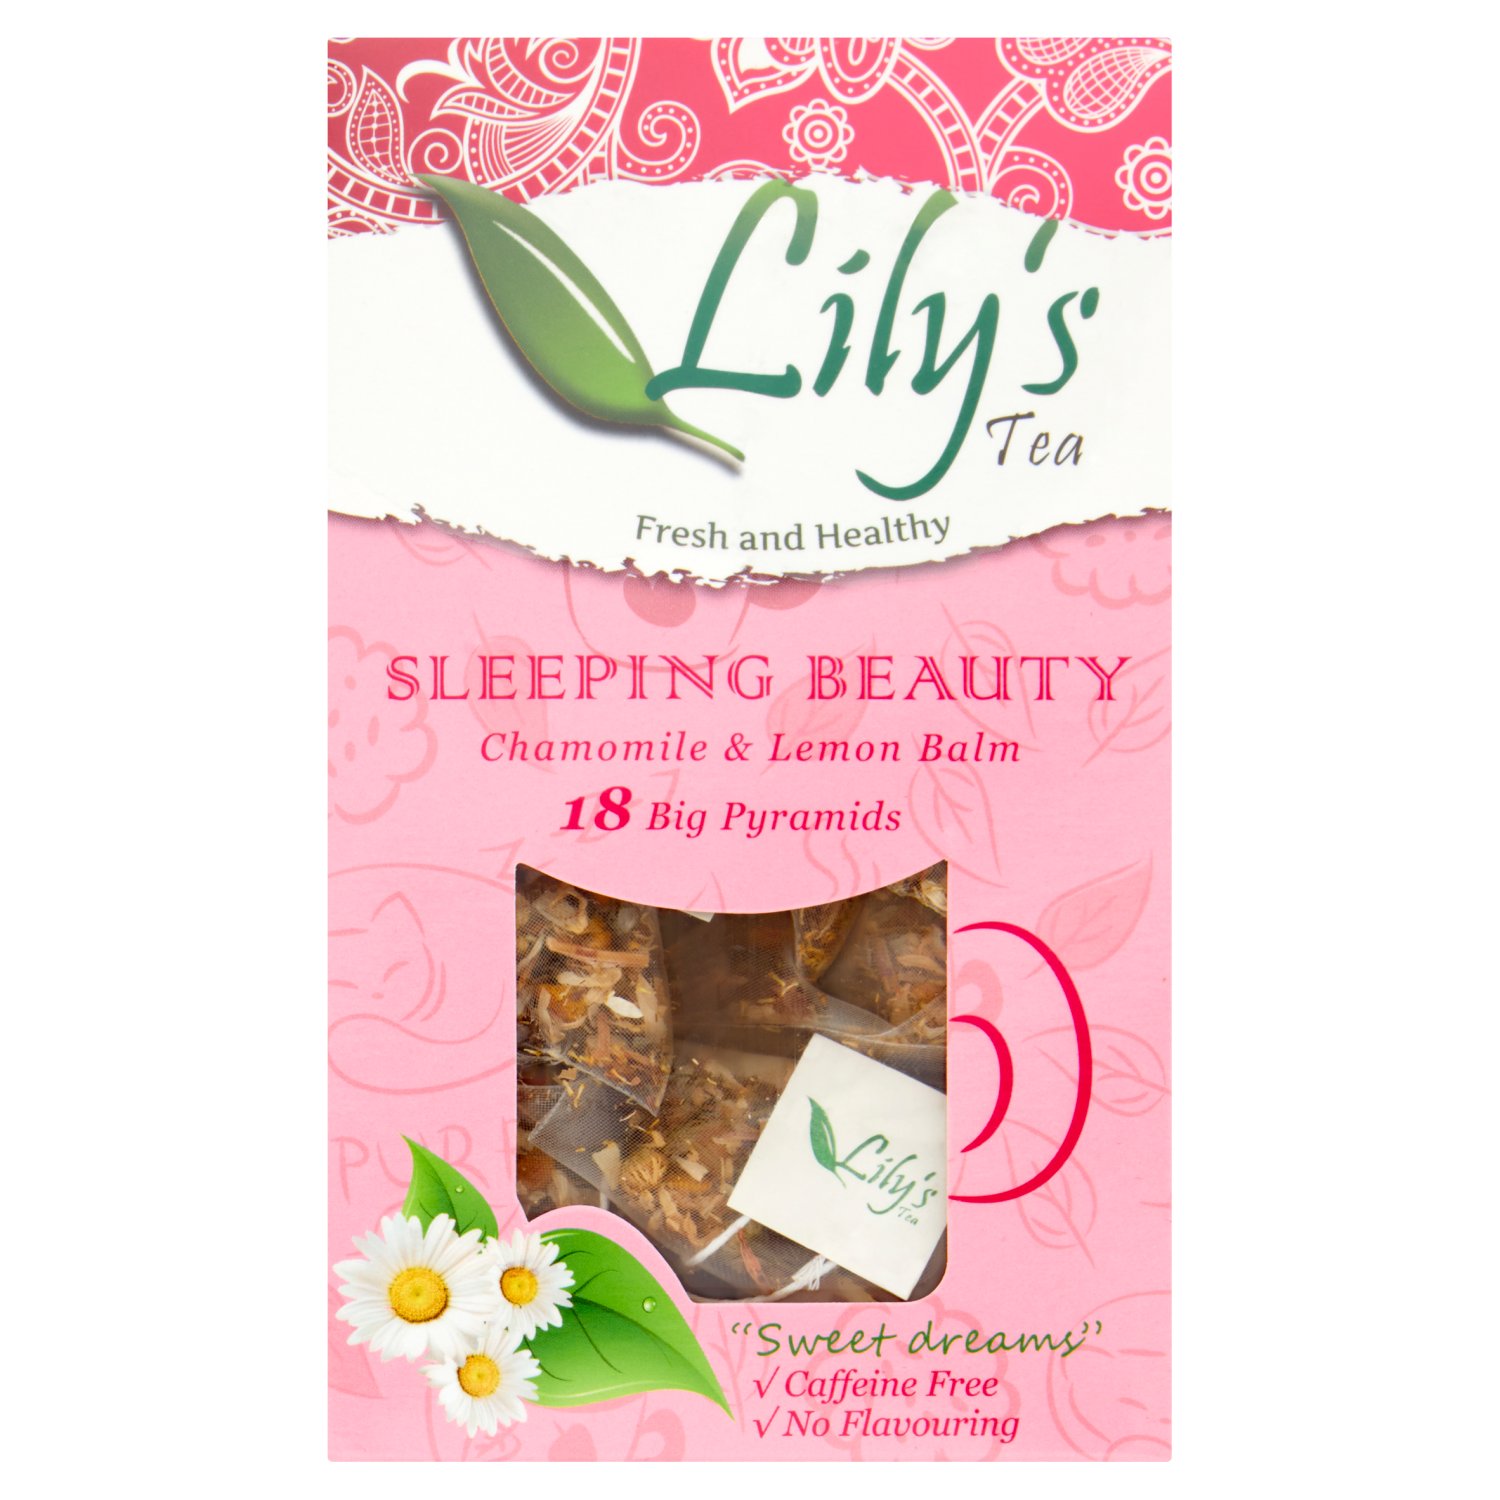 Sleeping Beauty
These magnificent chamomile blossoms are not crushed or milled but wholesomely blended with amazing yet under-appreciated lemon balm leaf. Both are excellent for helping a good night's sleep. Gently sweet and relaxing. 100% Natural with- out flavouring. Naturally caffeine free.